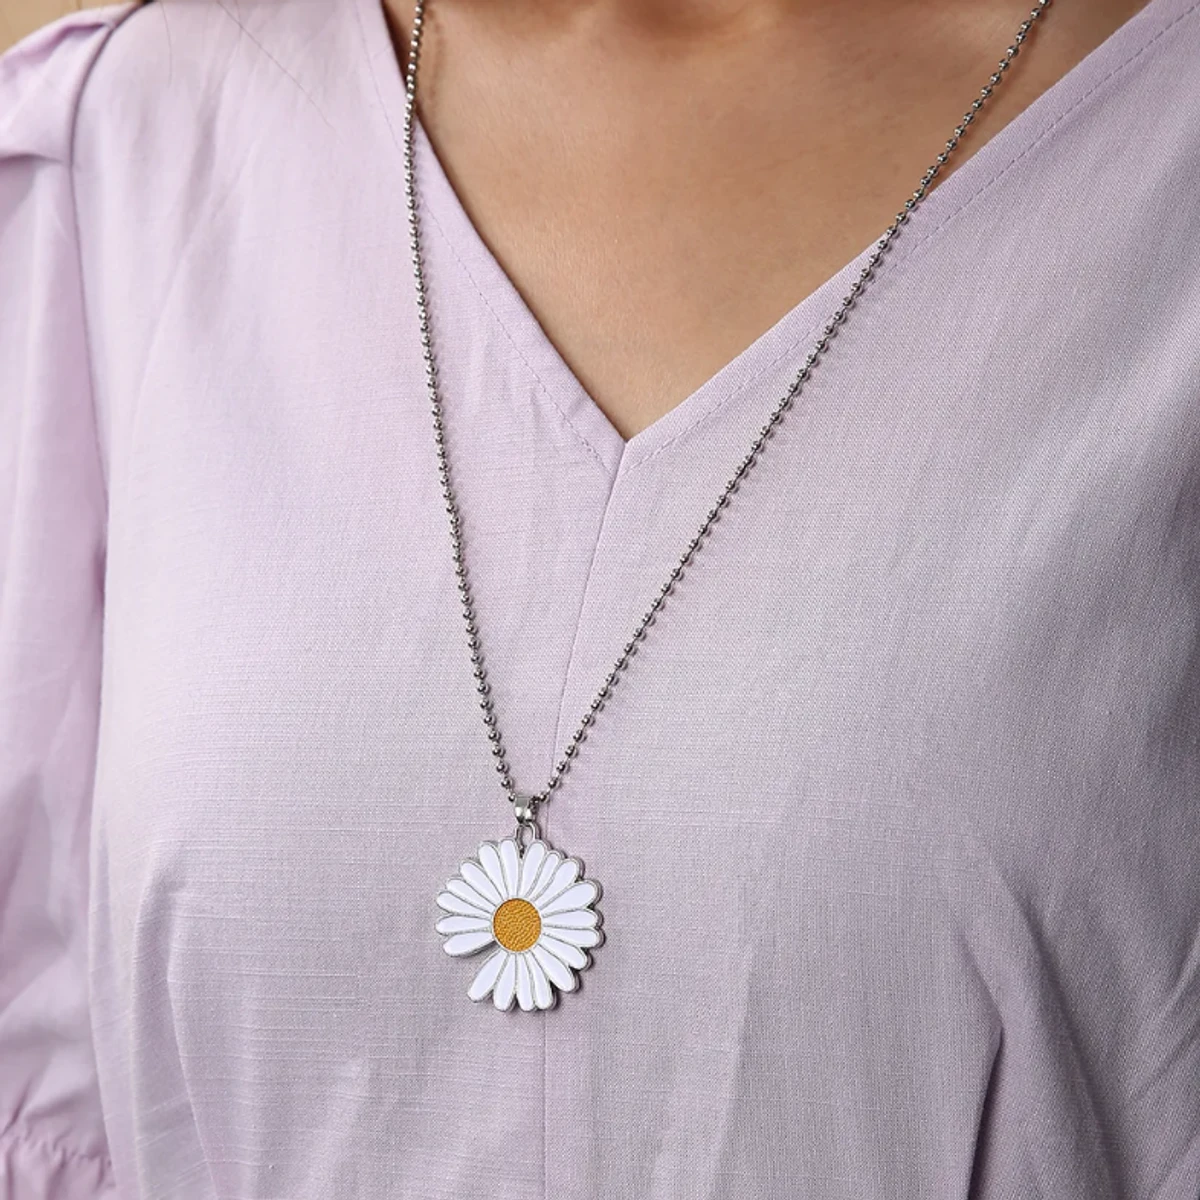 Fashionable Necklace For Sunflower Necklace Ins Girl